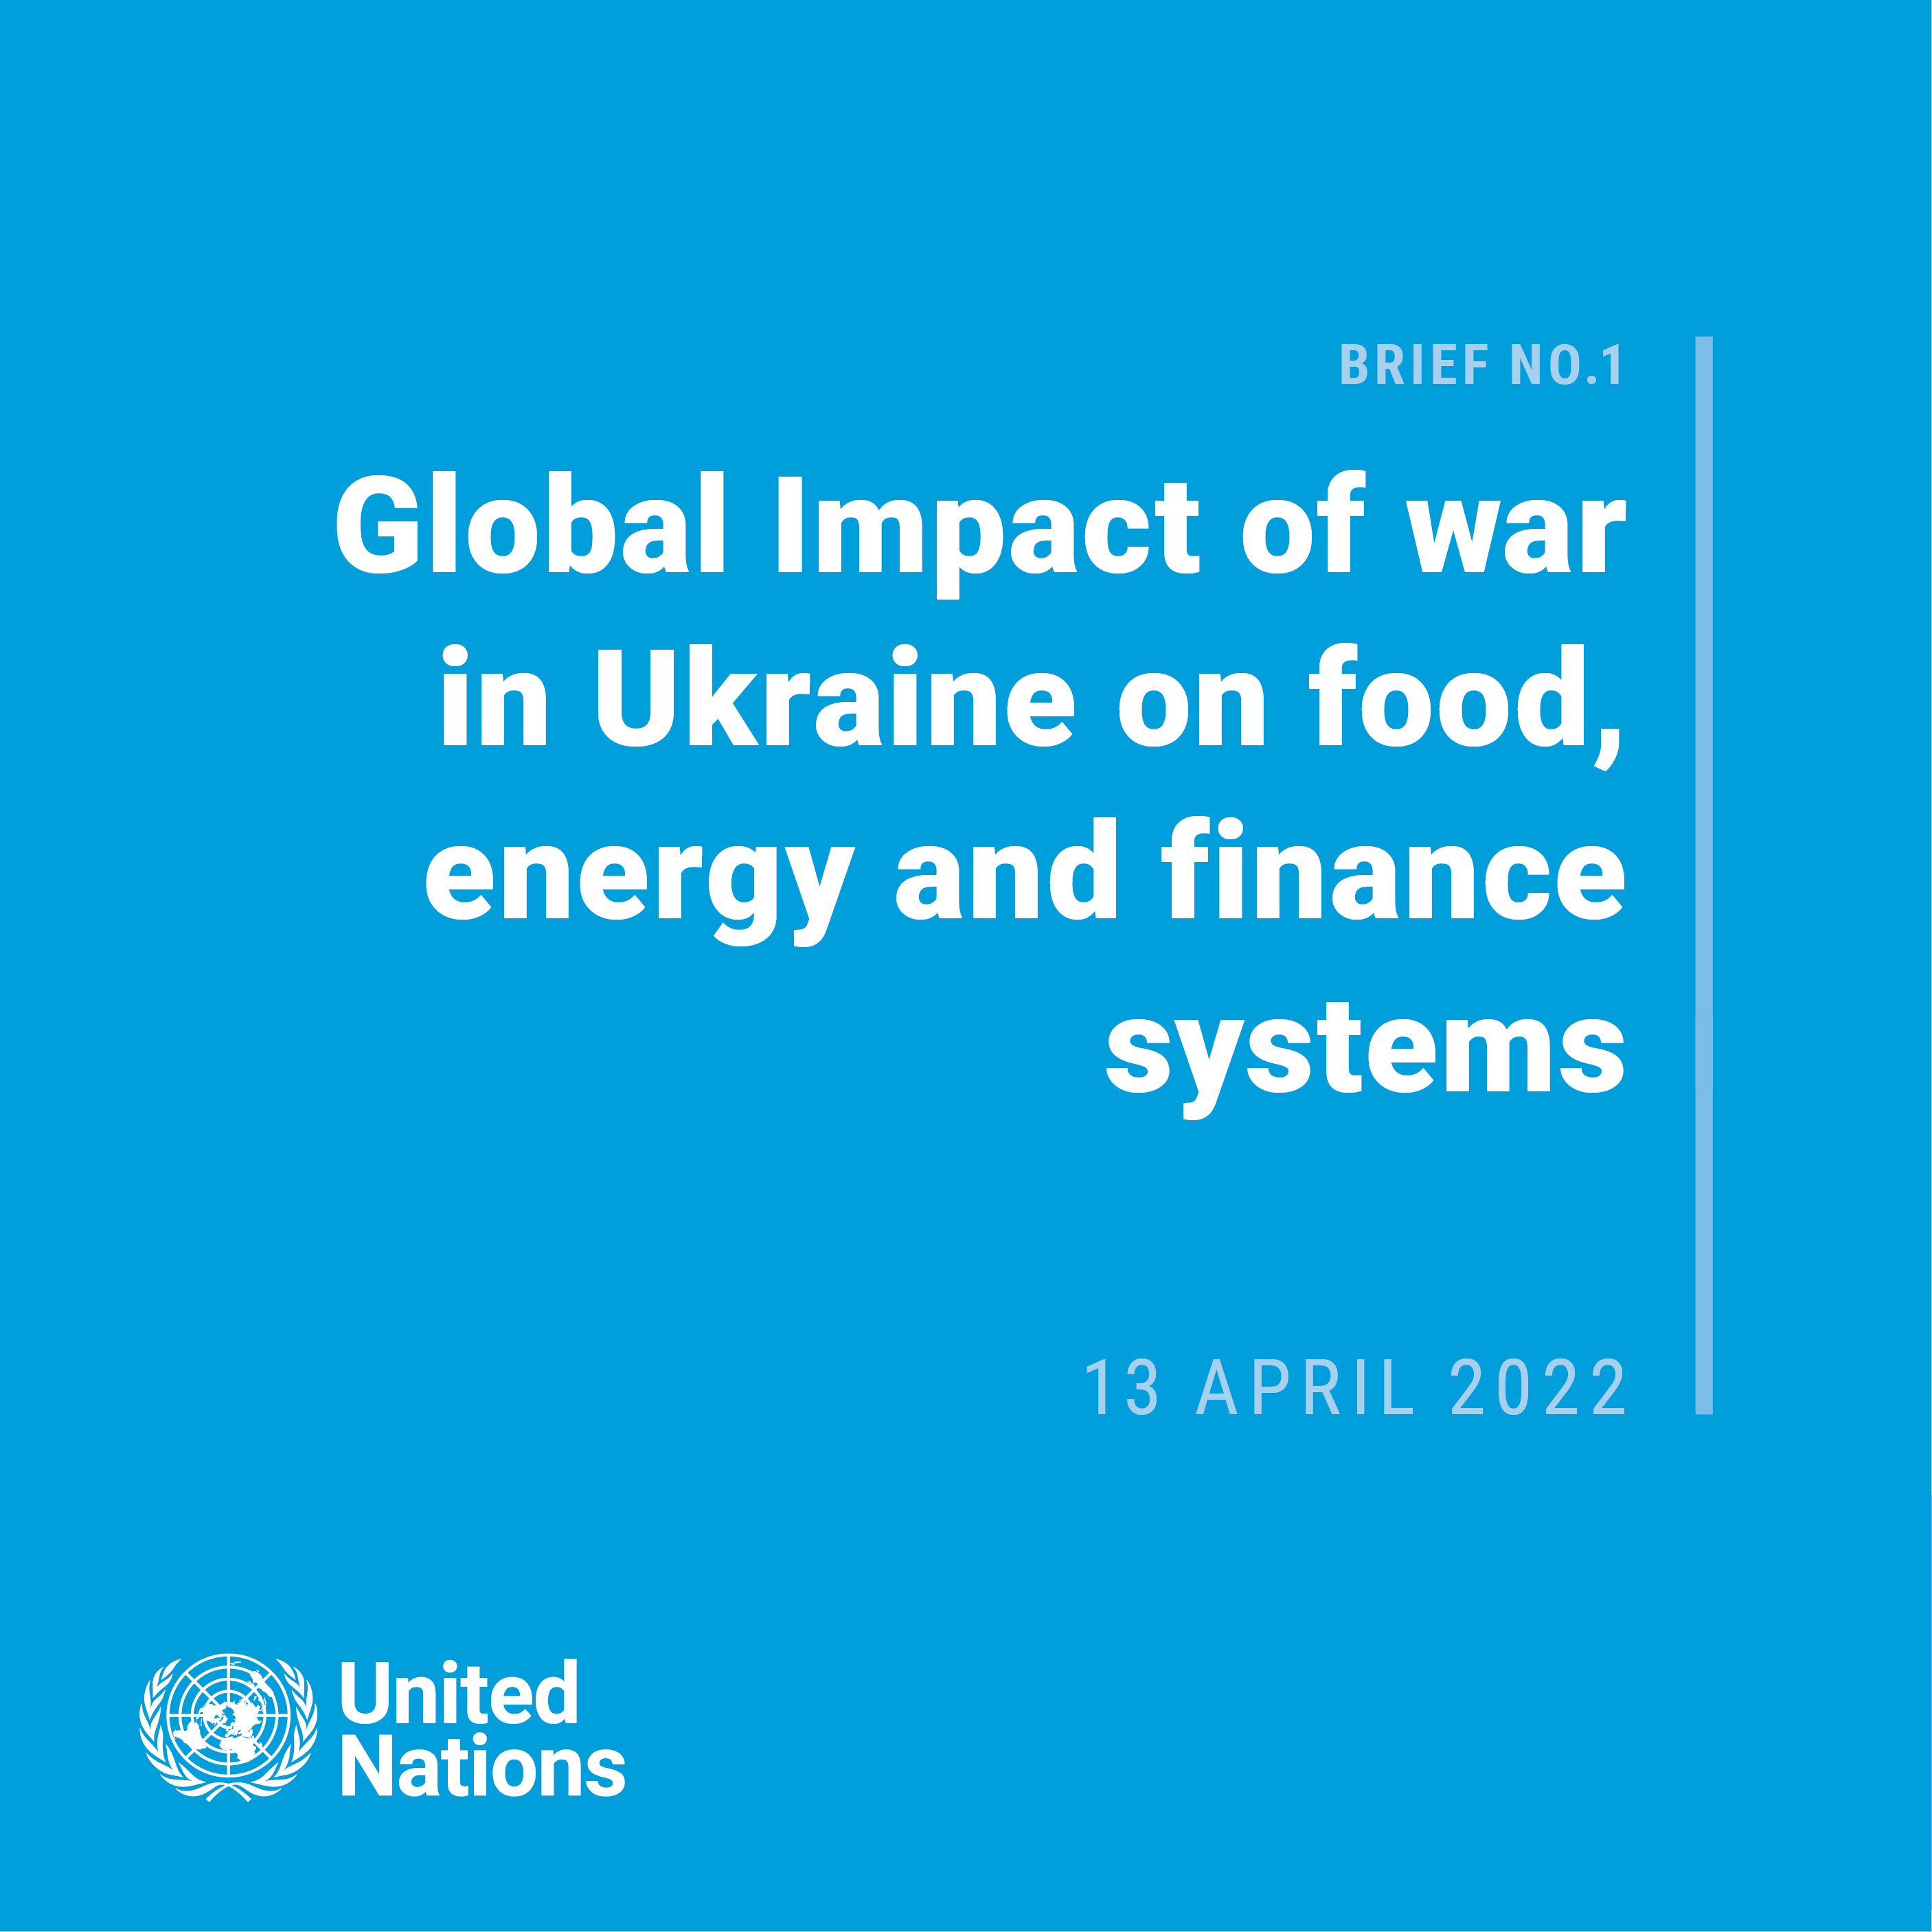 Global Impact of war in Ukraine on food, energy and finance systems - Brief No.1